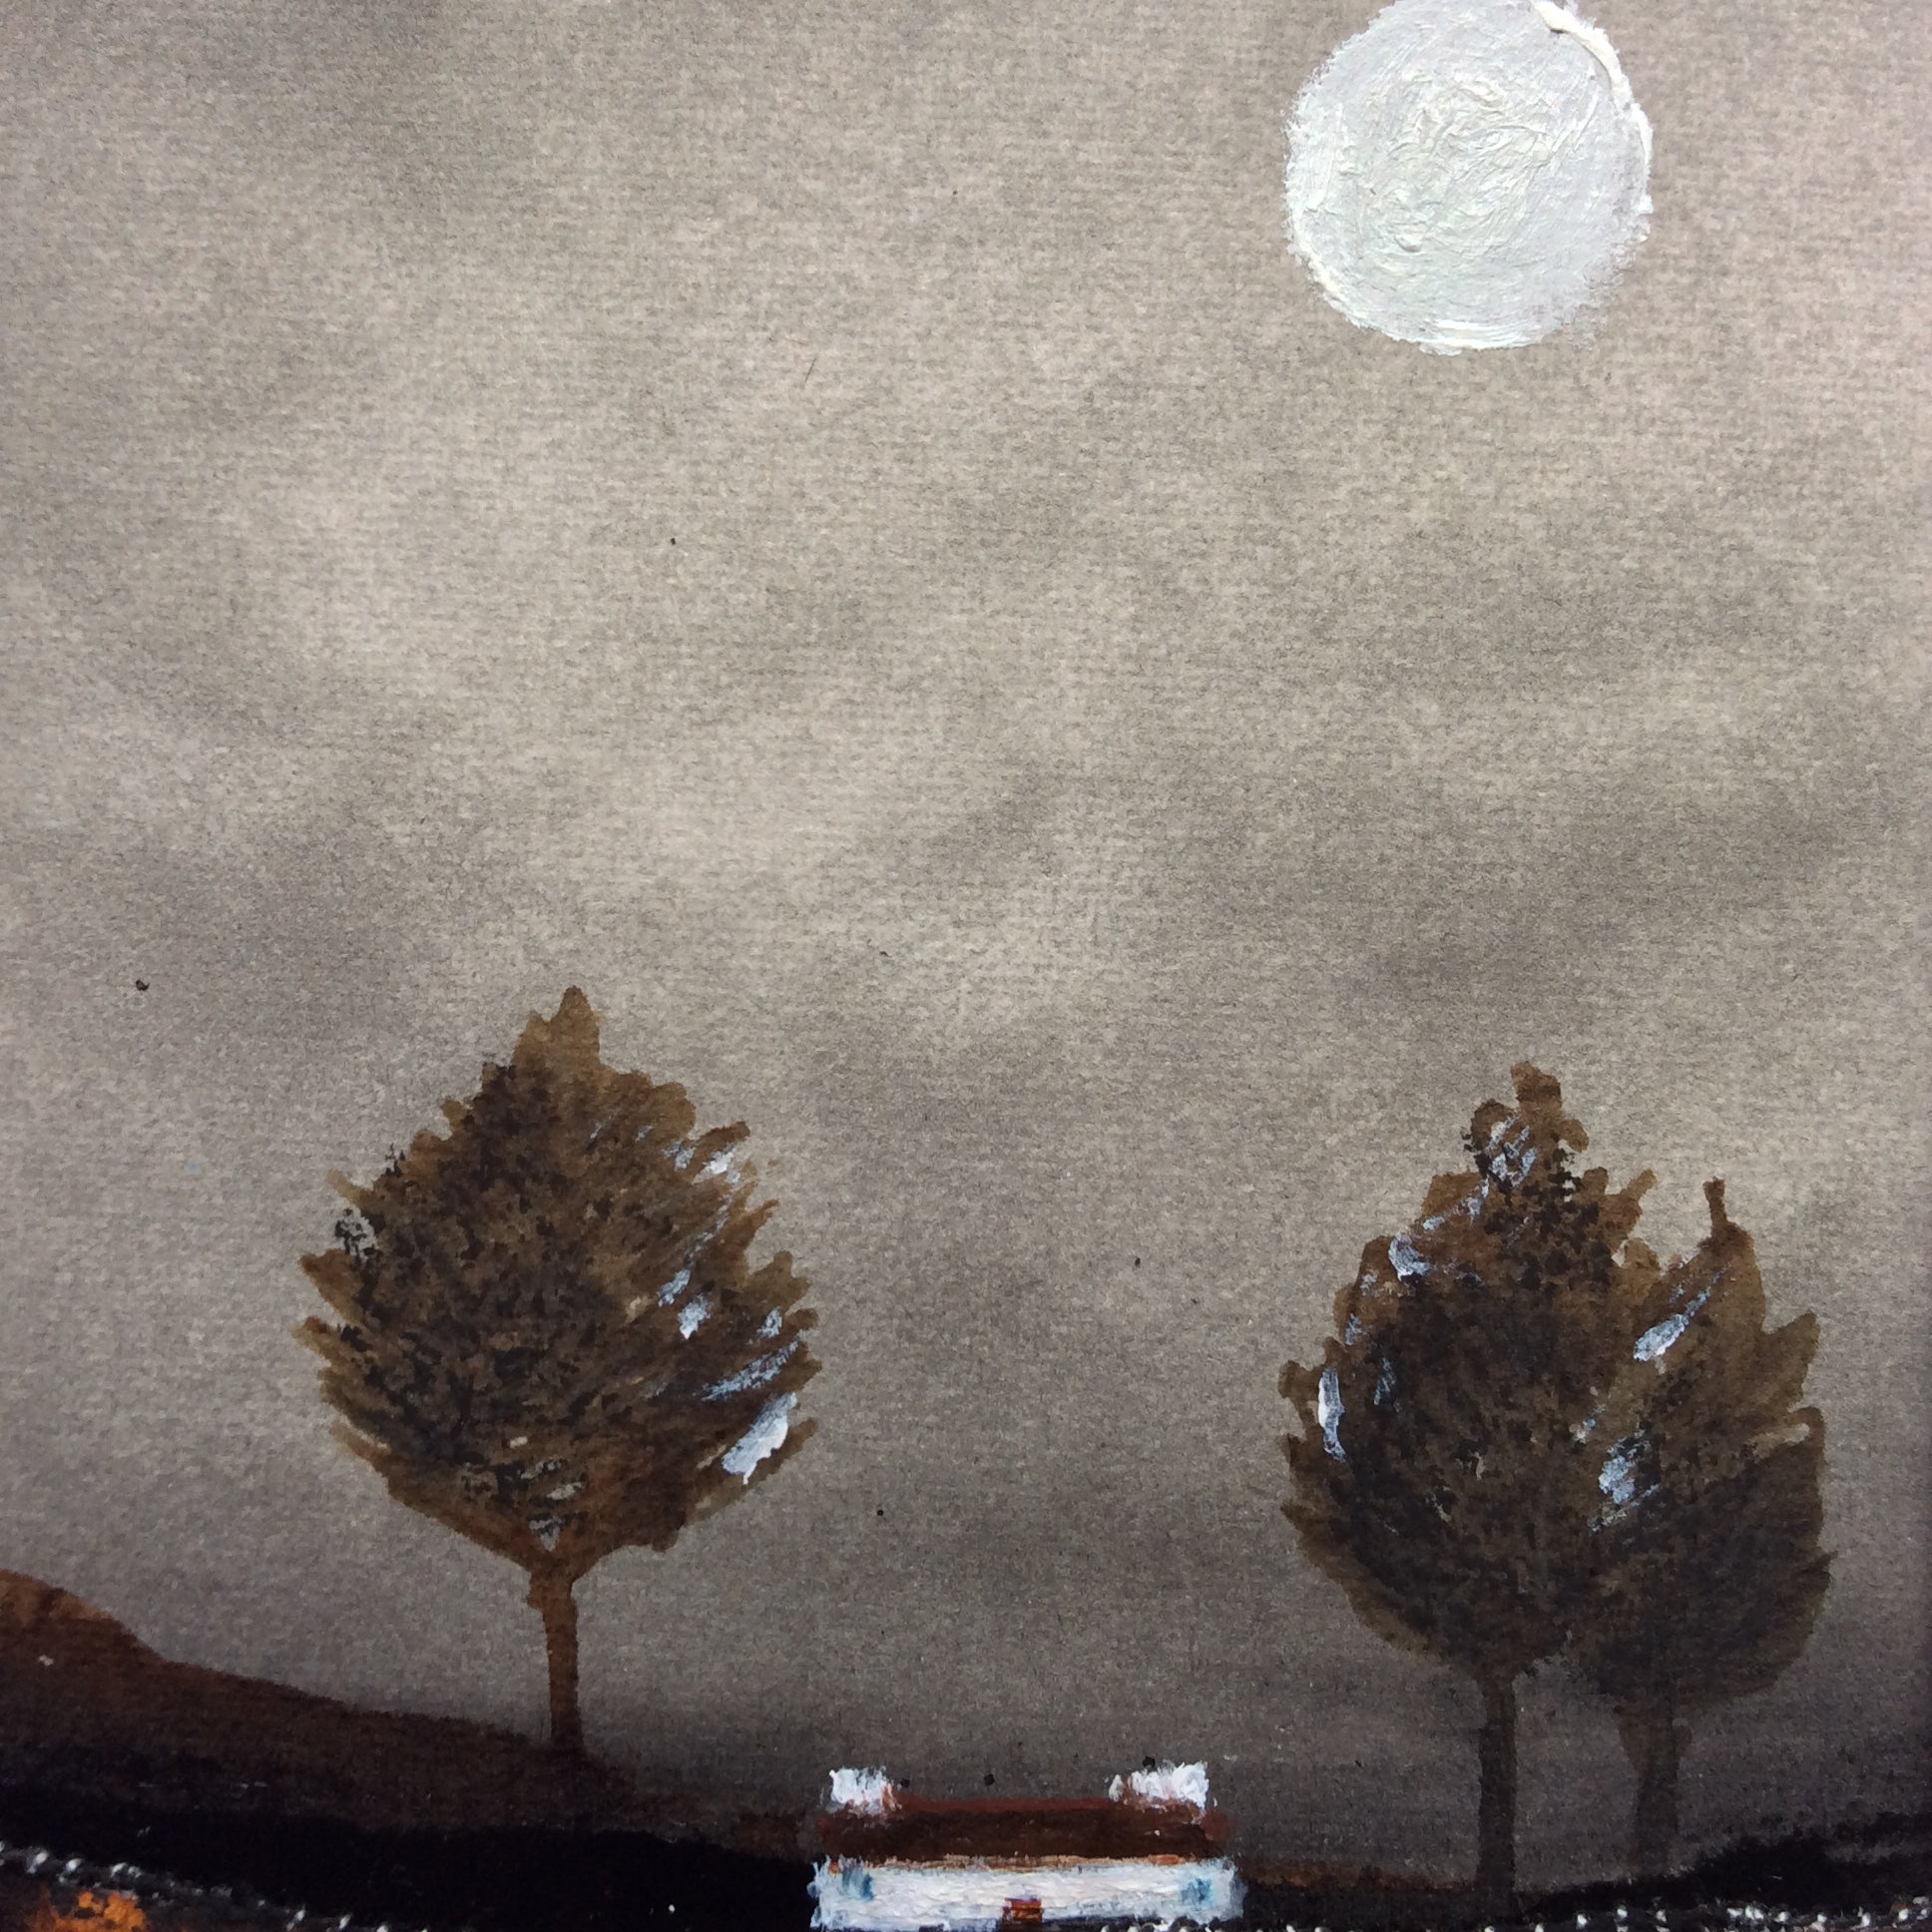 Mixed Media Art work by Louise O'Hara "In the shadow of the trees”